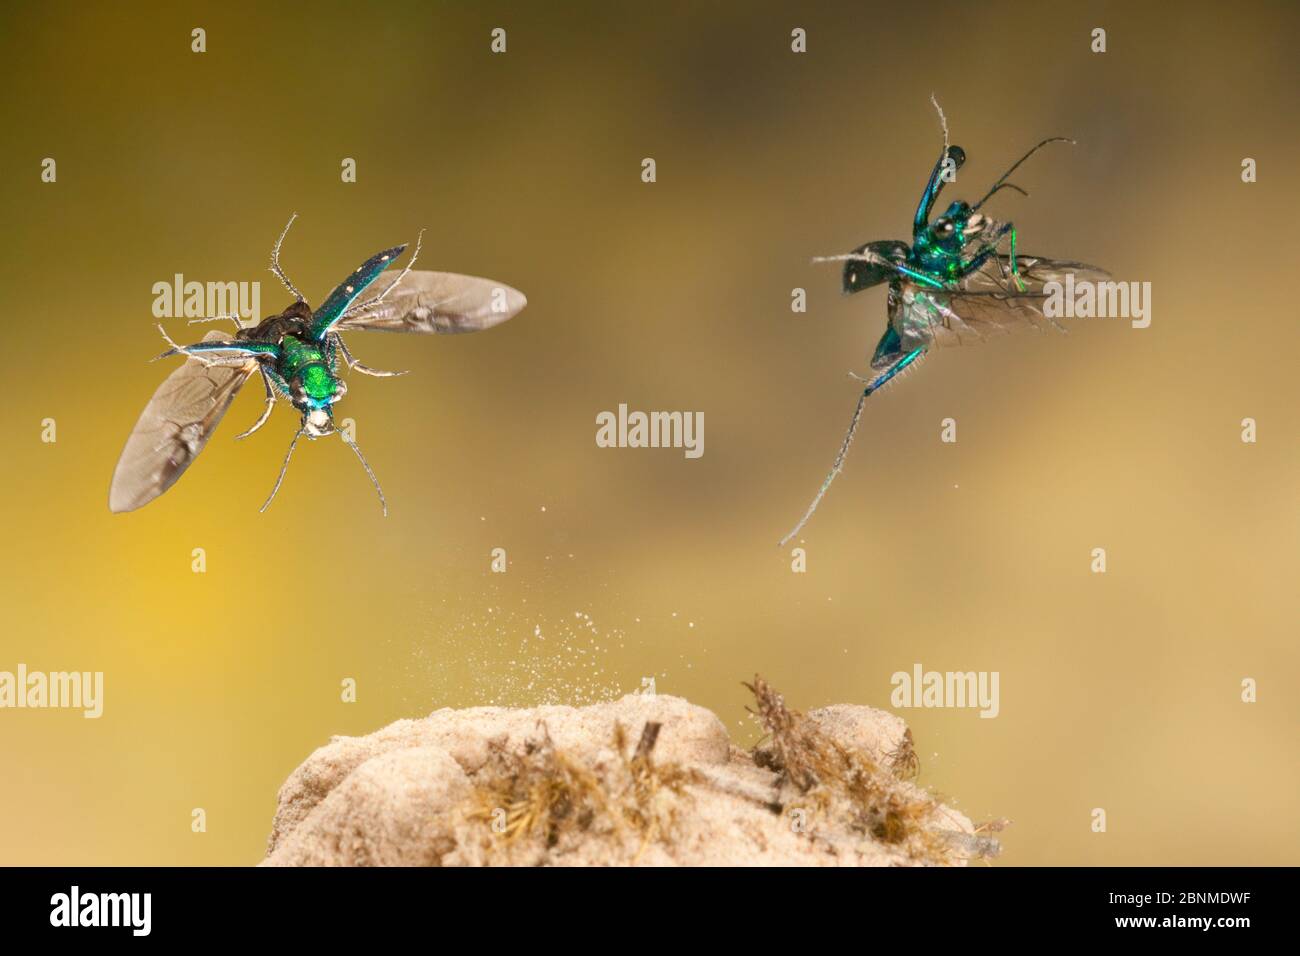 Tiger beetle (Cicindela sexguttata) flying image, Bastrop County, Texas, USA. Controlled conditions. March Stock Photo